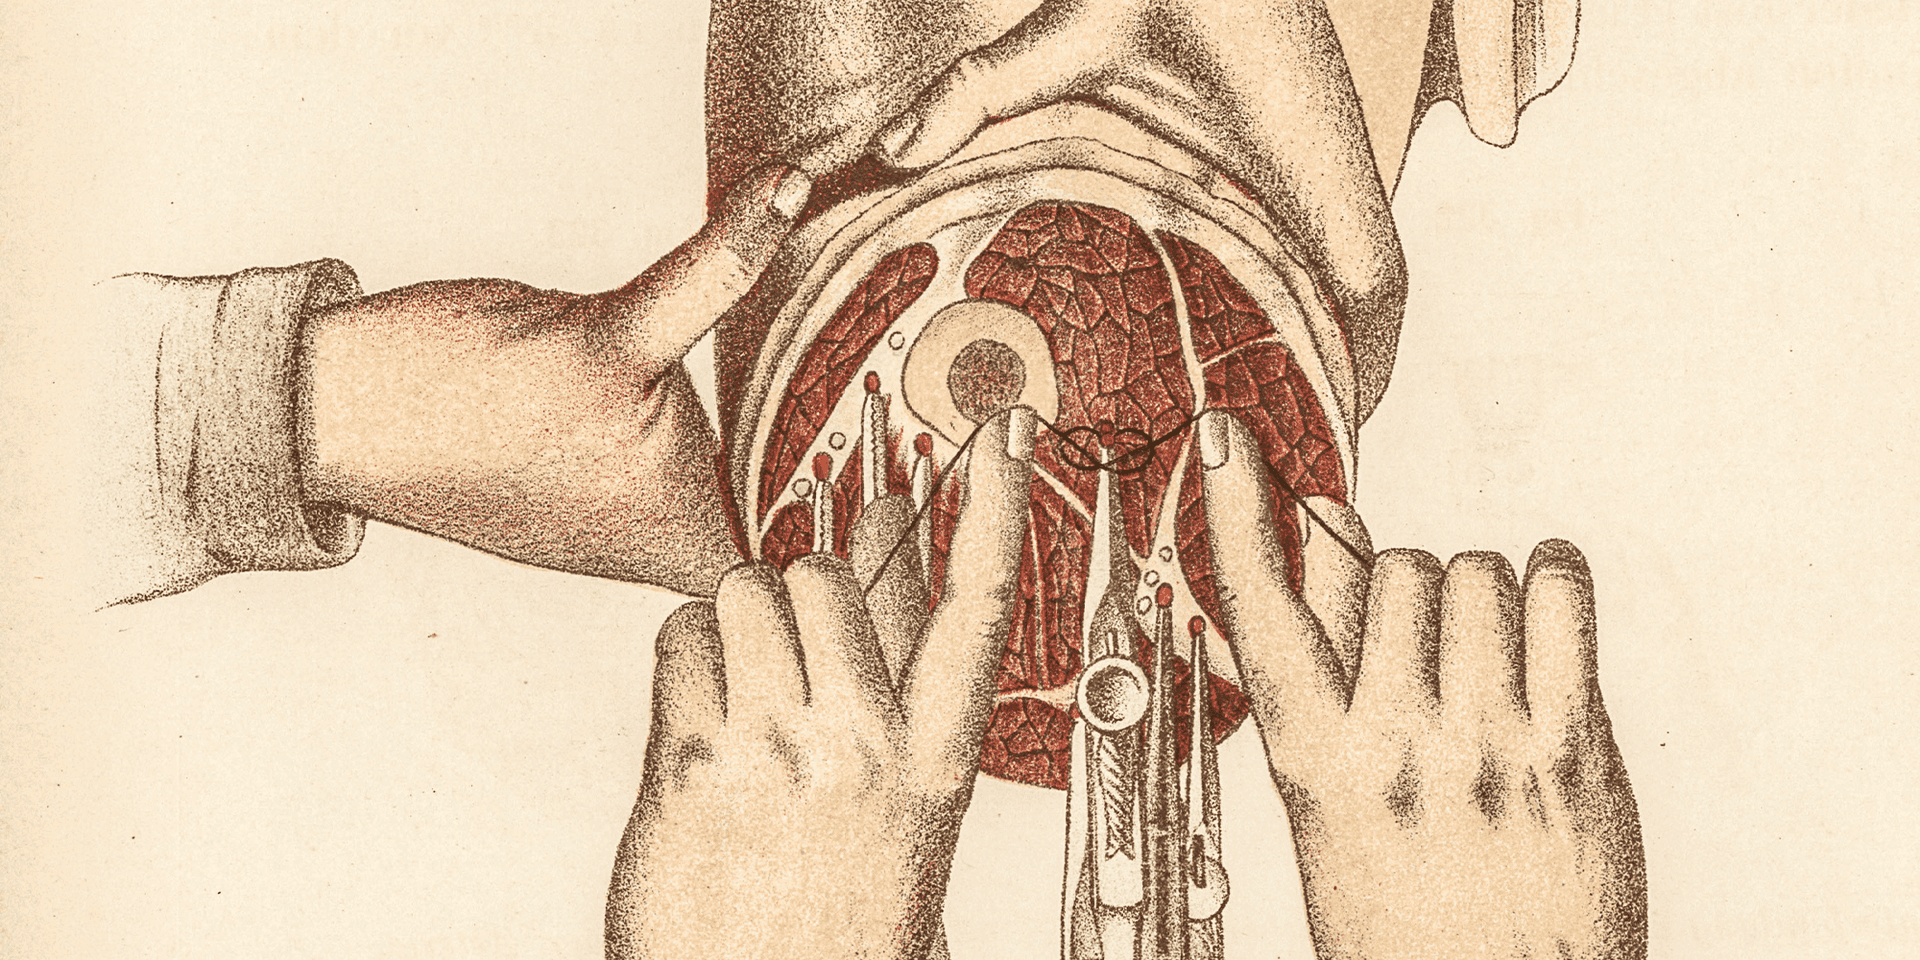 Illustration of four hands holding medical tools and cutting away at a cross-section of an amputated limb